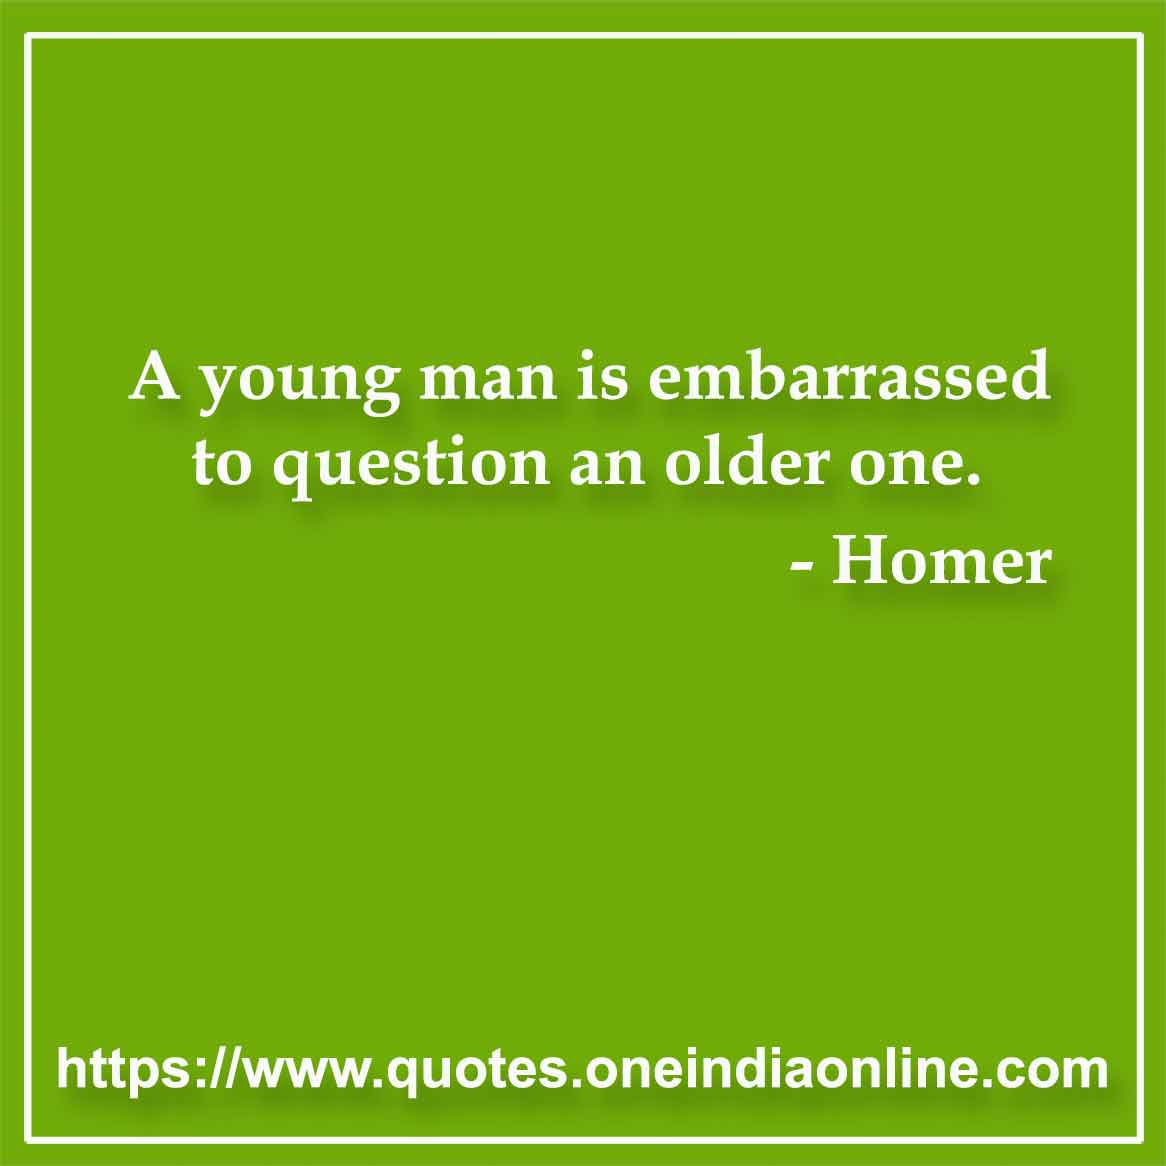 A young man is embarrassed to question an older one. 

- Question Quotes by Homer 